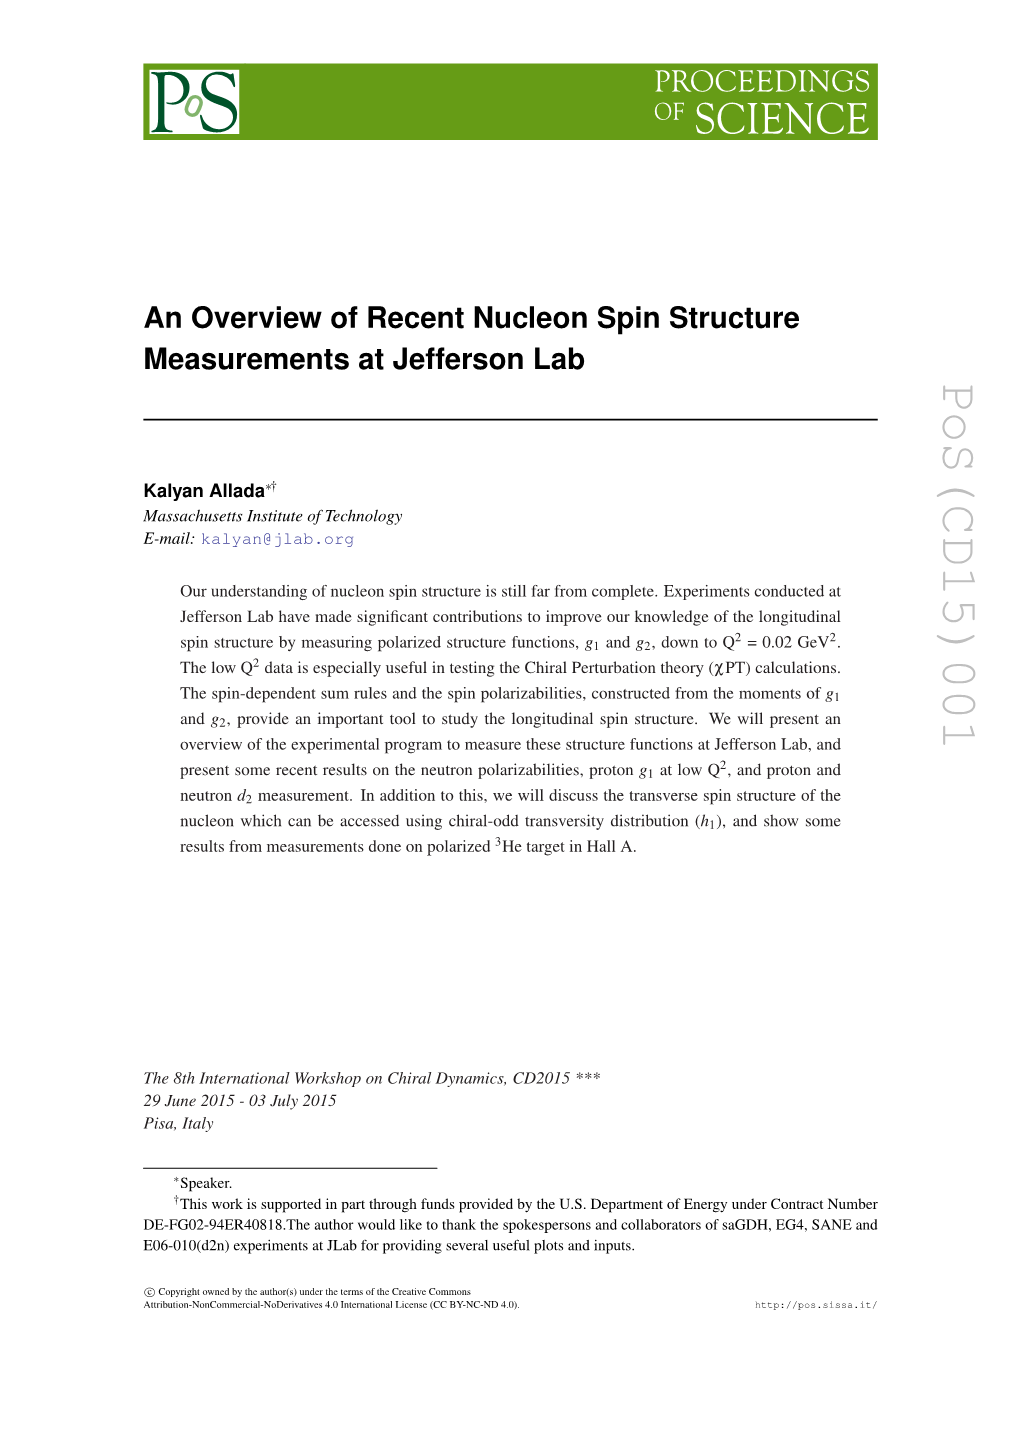 An Overview of Recent Nucleon Spin Structure Measurements at Jefferson